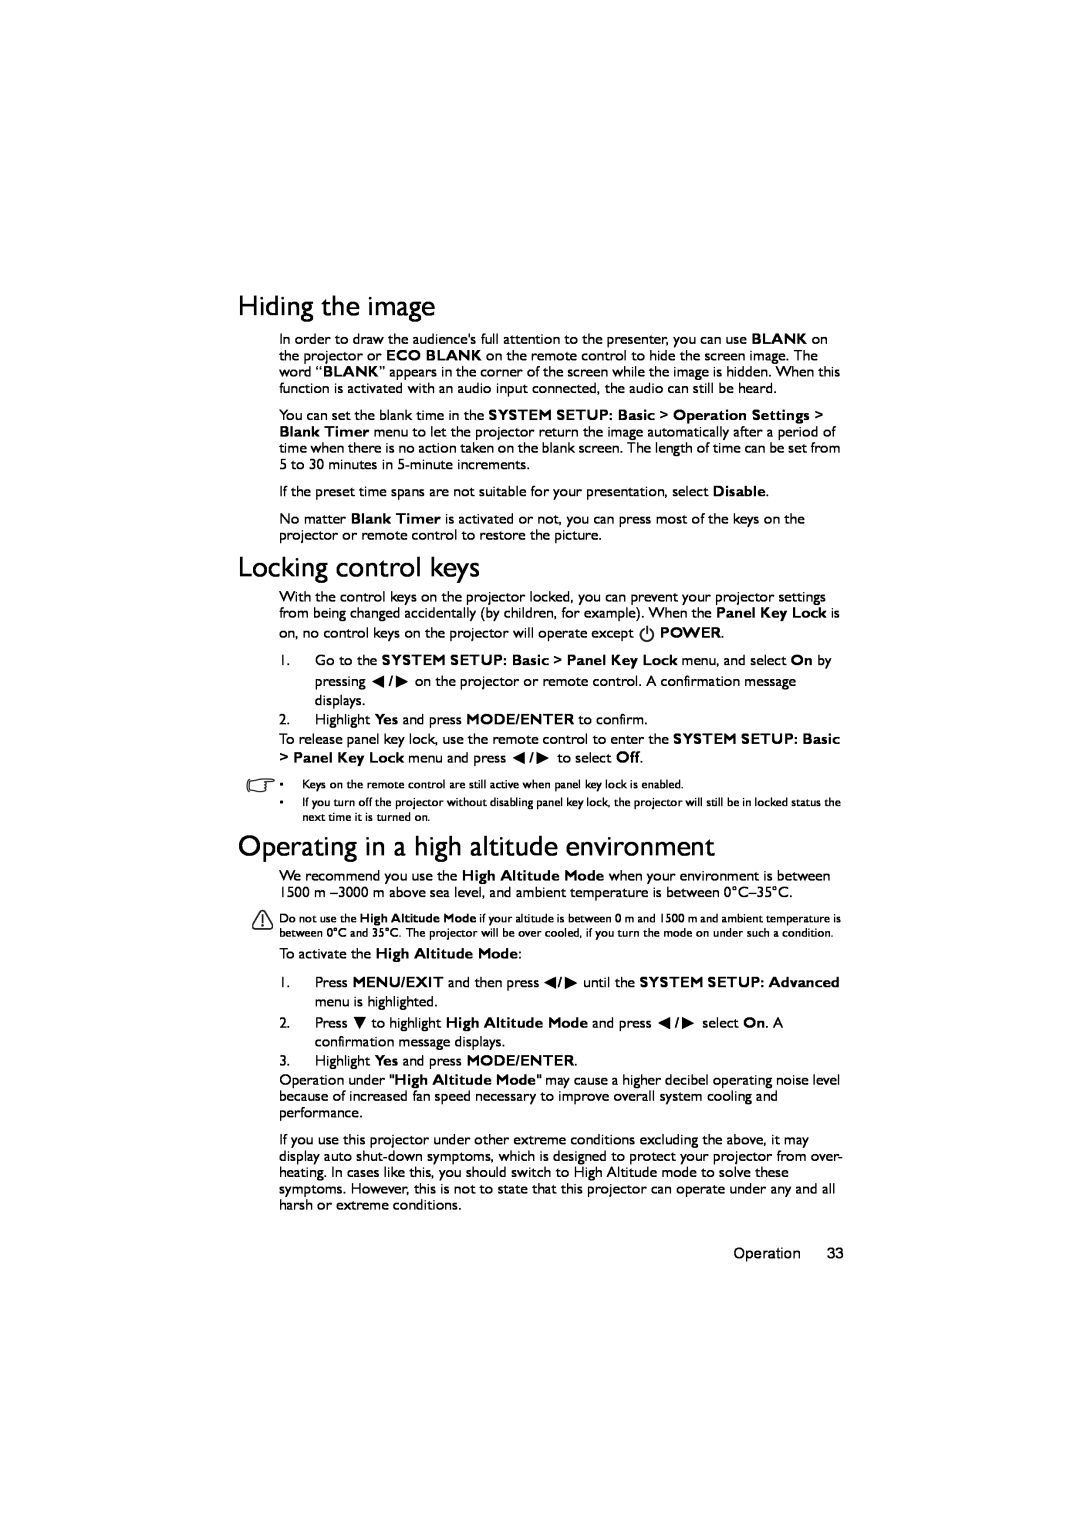 BenQ MX722 user manual Hiding the image, Locking control keys, Operating in a high altitude environment 